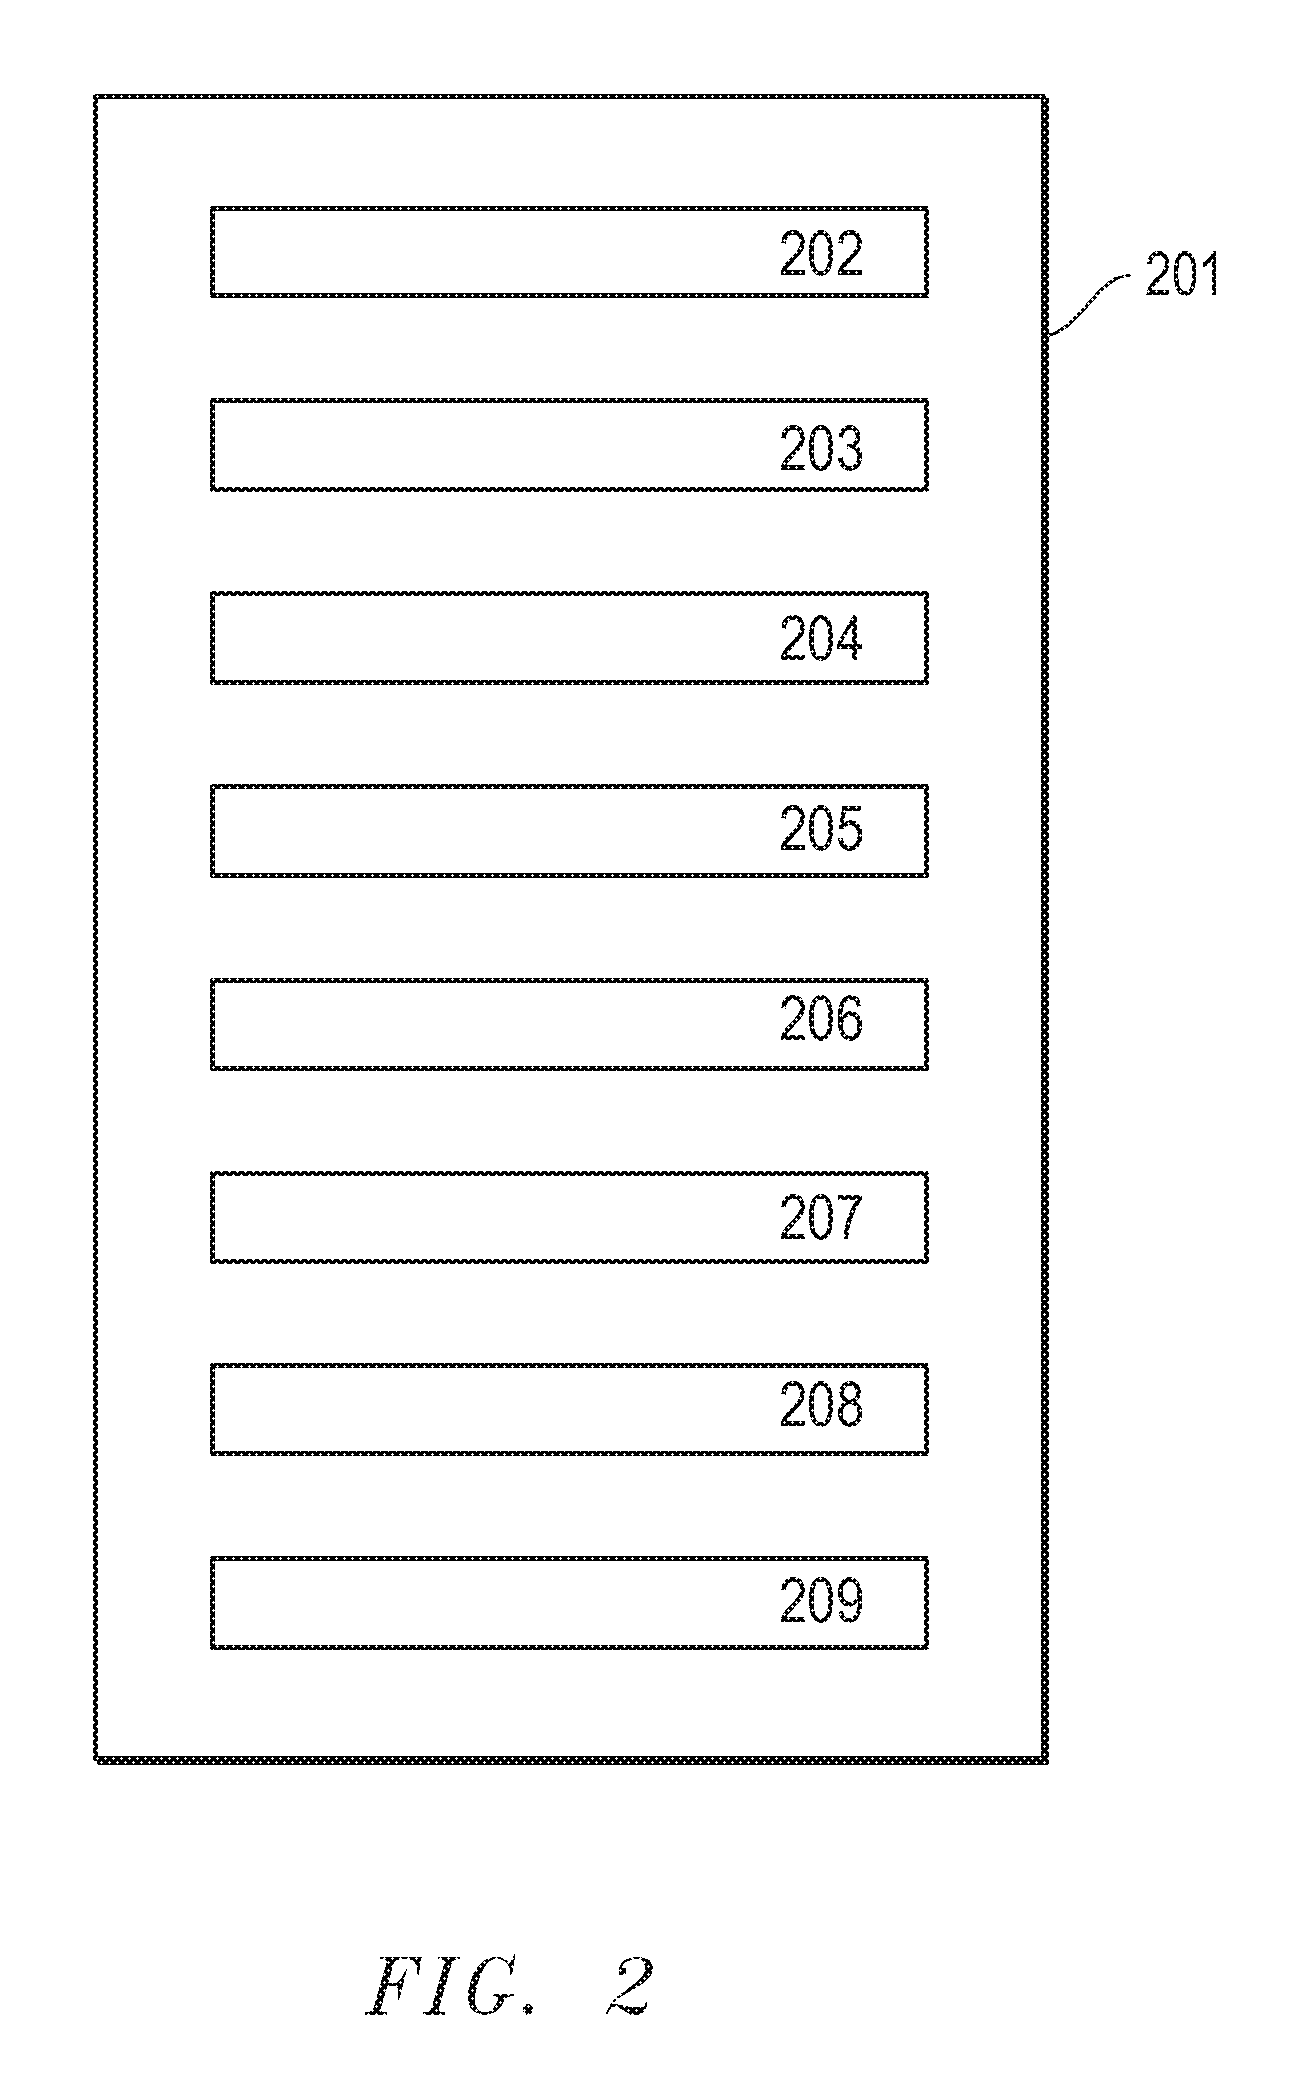 System and Method for Managing Data Across Multiple Environments